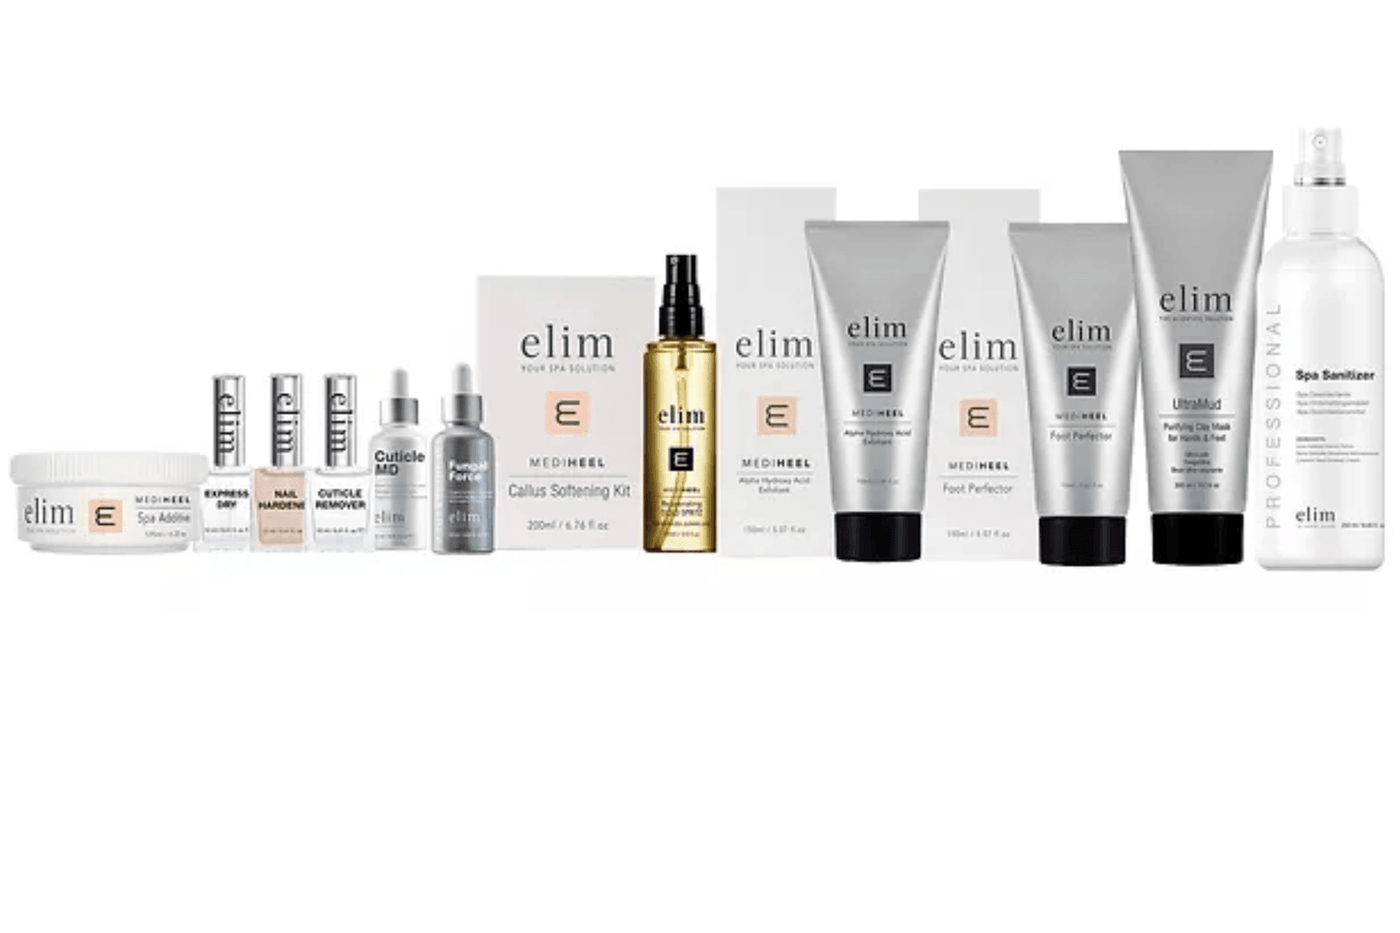 Elim Spa Products - Skin - The Beautiful Online Store